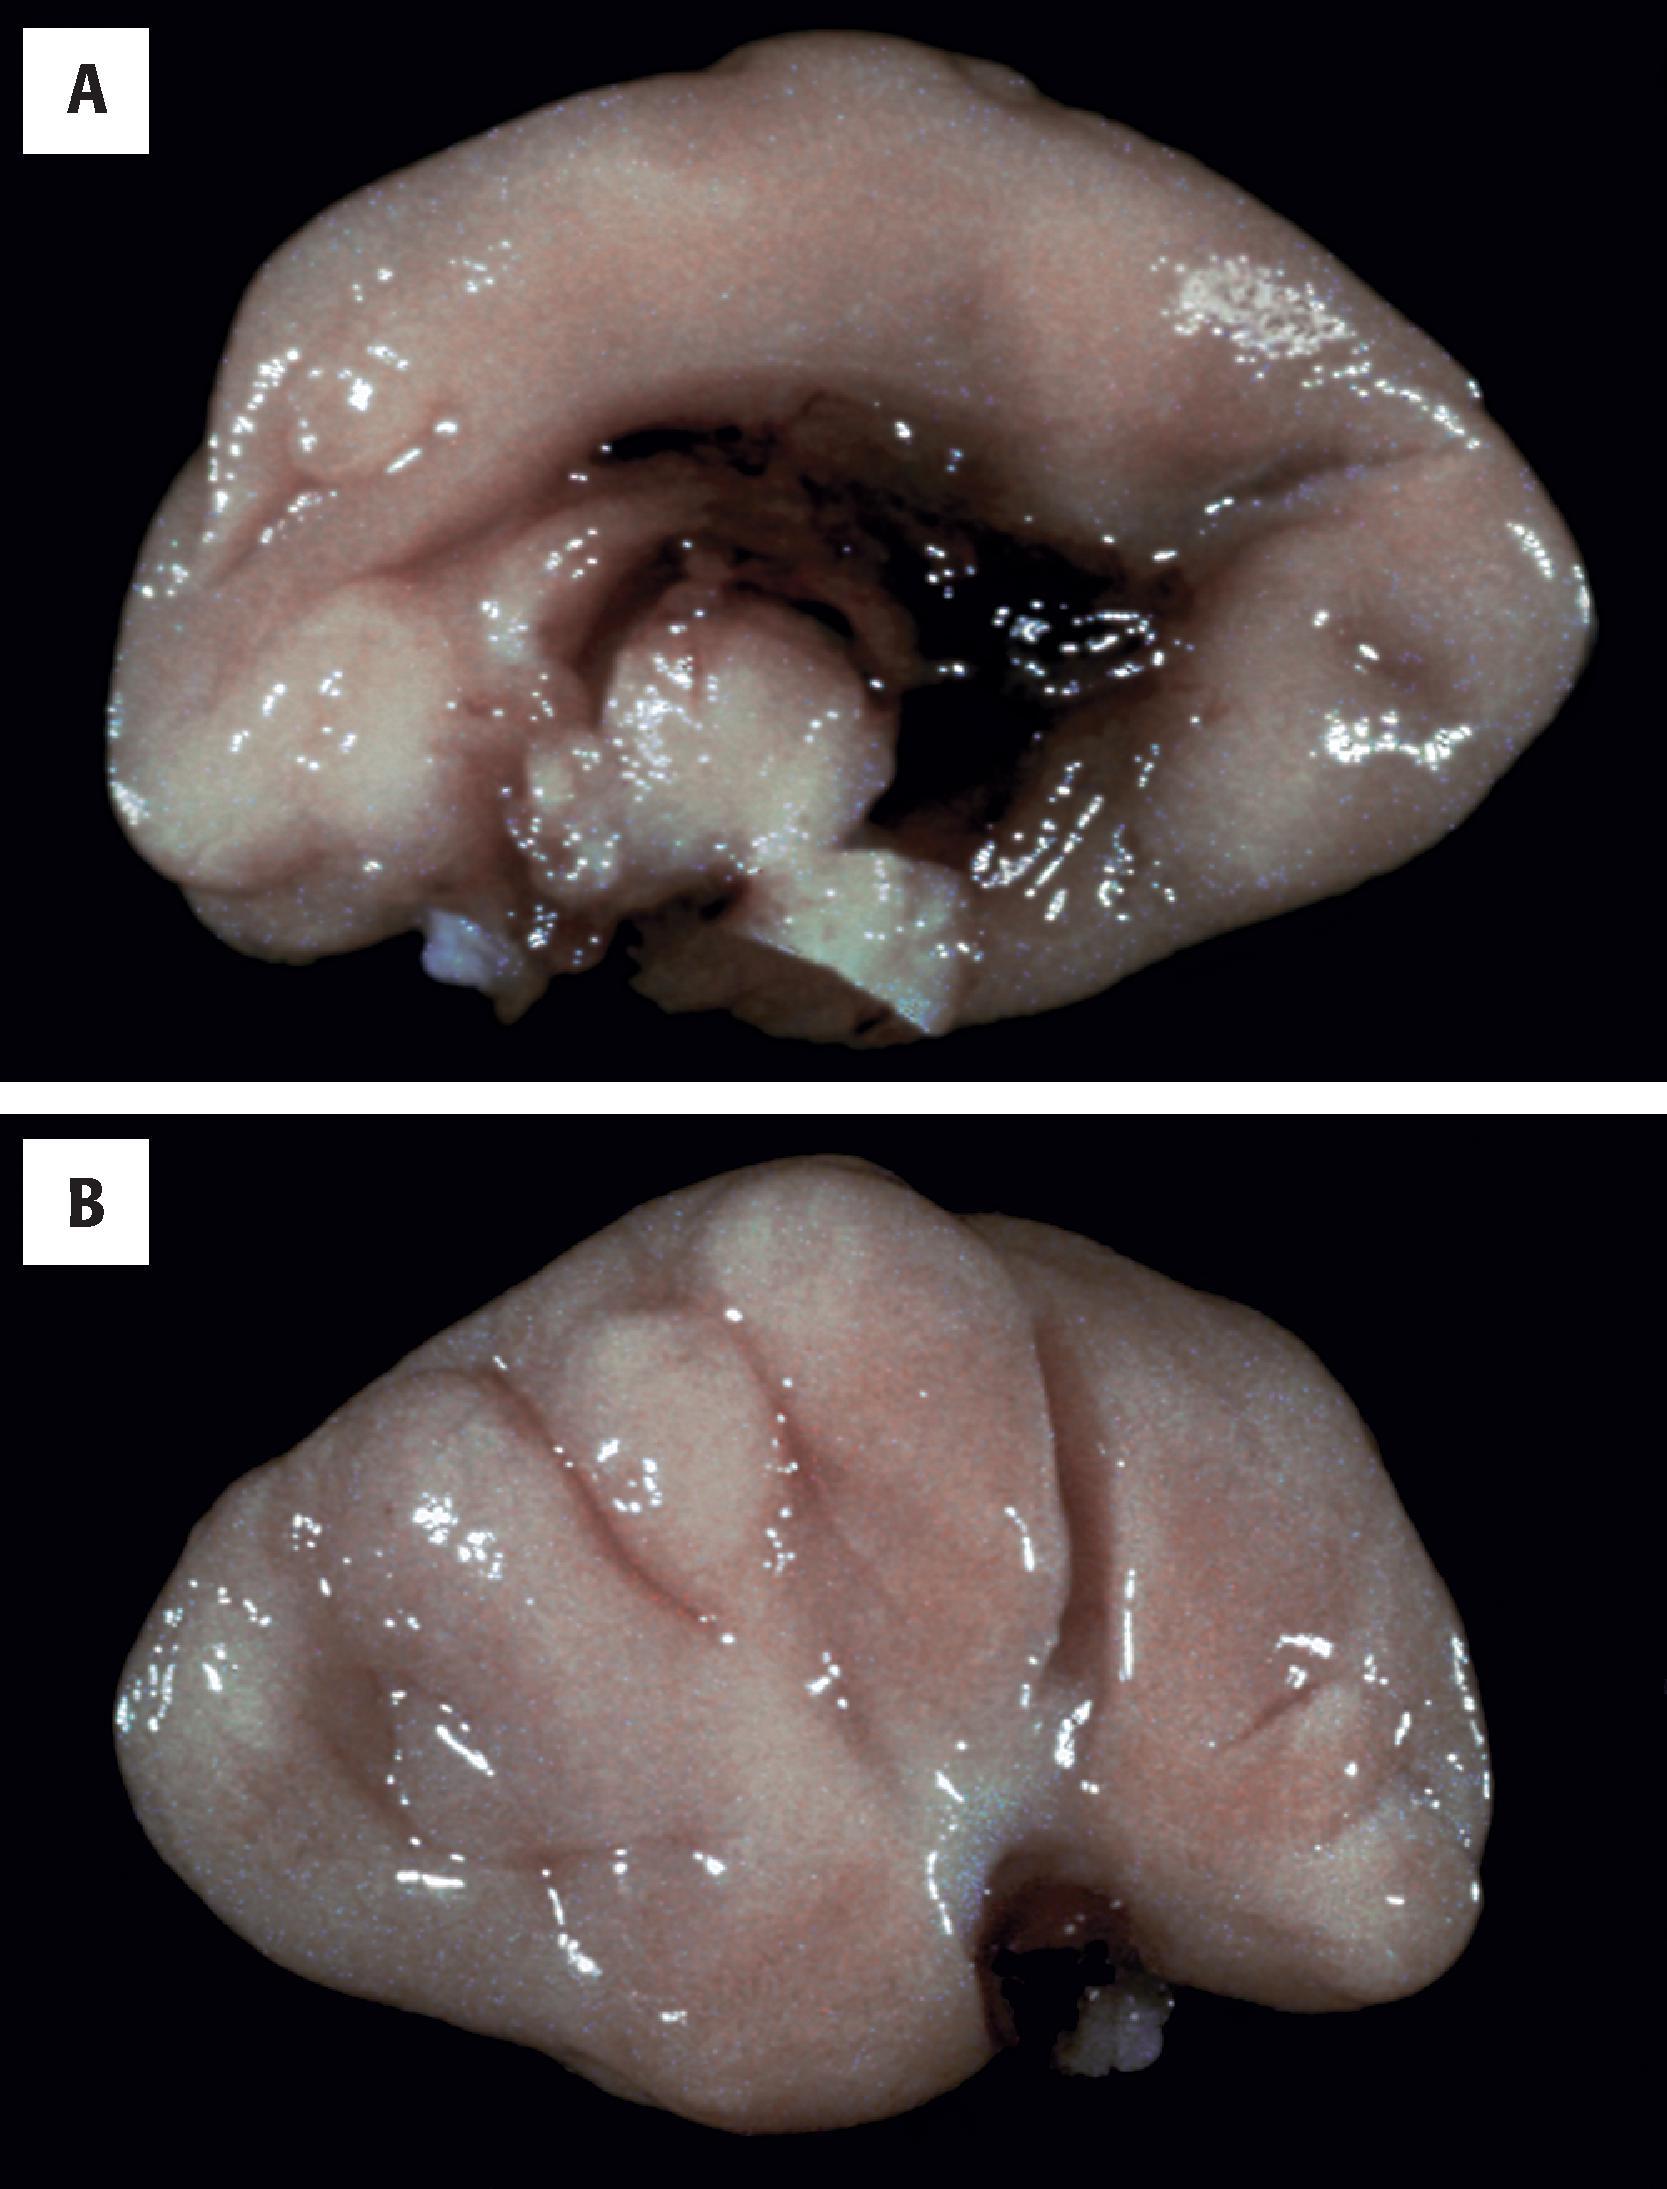 FIGURE 4.22, Aicardi syndrome. ( A ) Medial view of the right hemisphere from a 22-week-gestation fetus showing absence of the corpus callosum. ( B ) On lateral view, abnormal cortical gyration is seen in the parietal region.